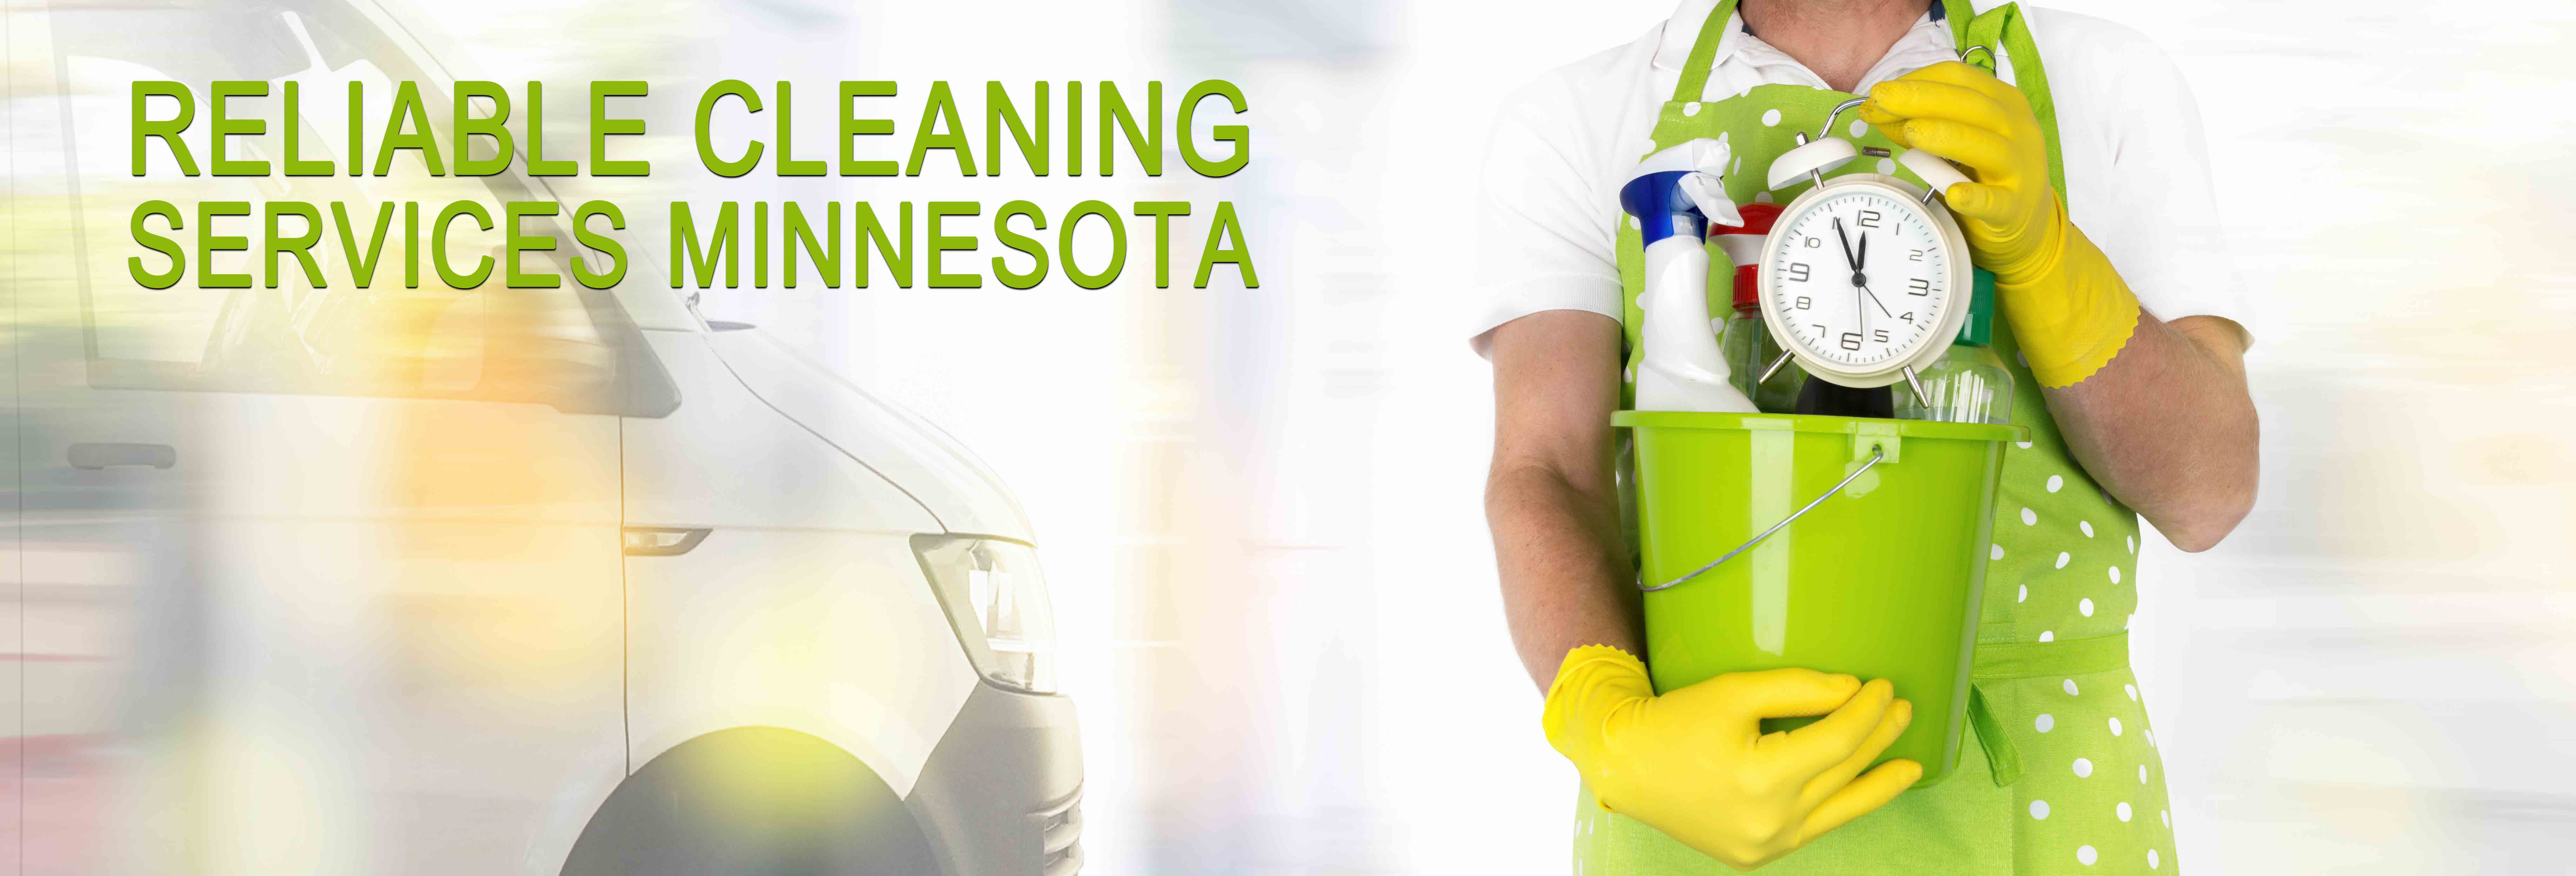 Commercial Janitorial Cleaning Services - Maple Grove MN ...